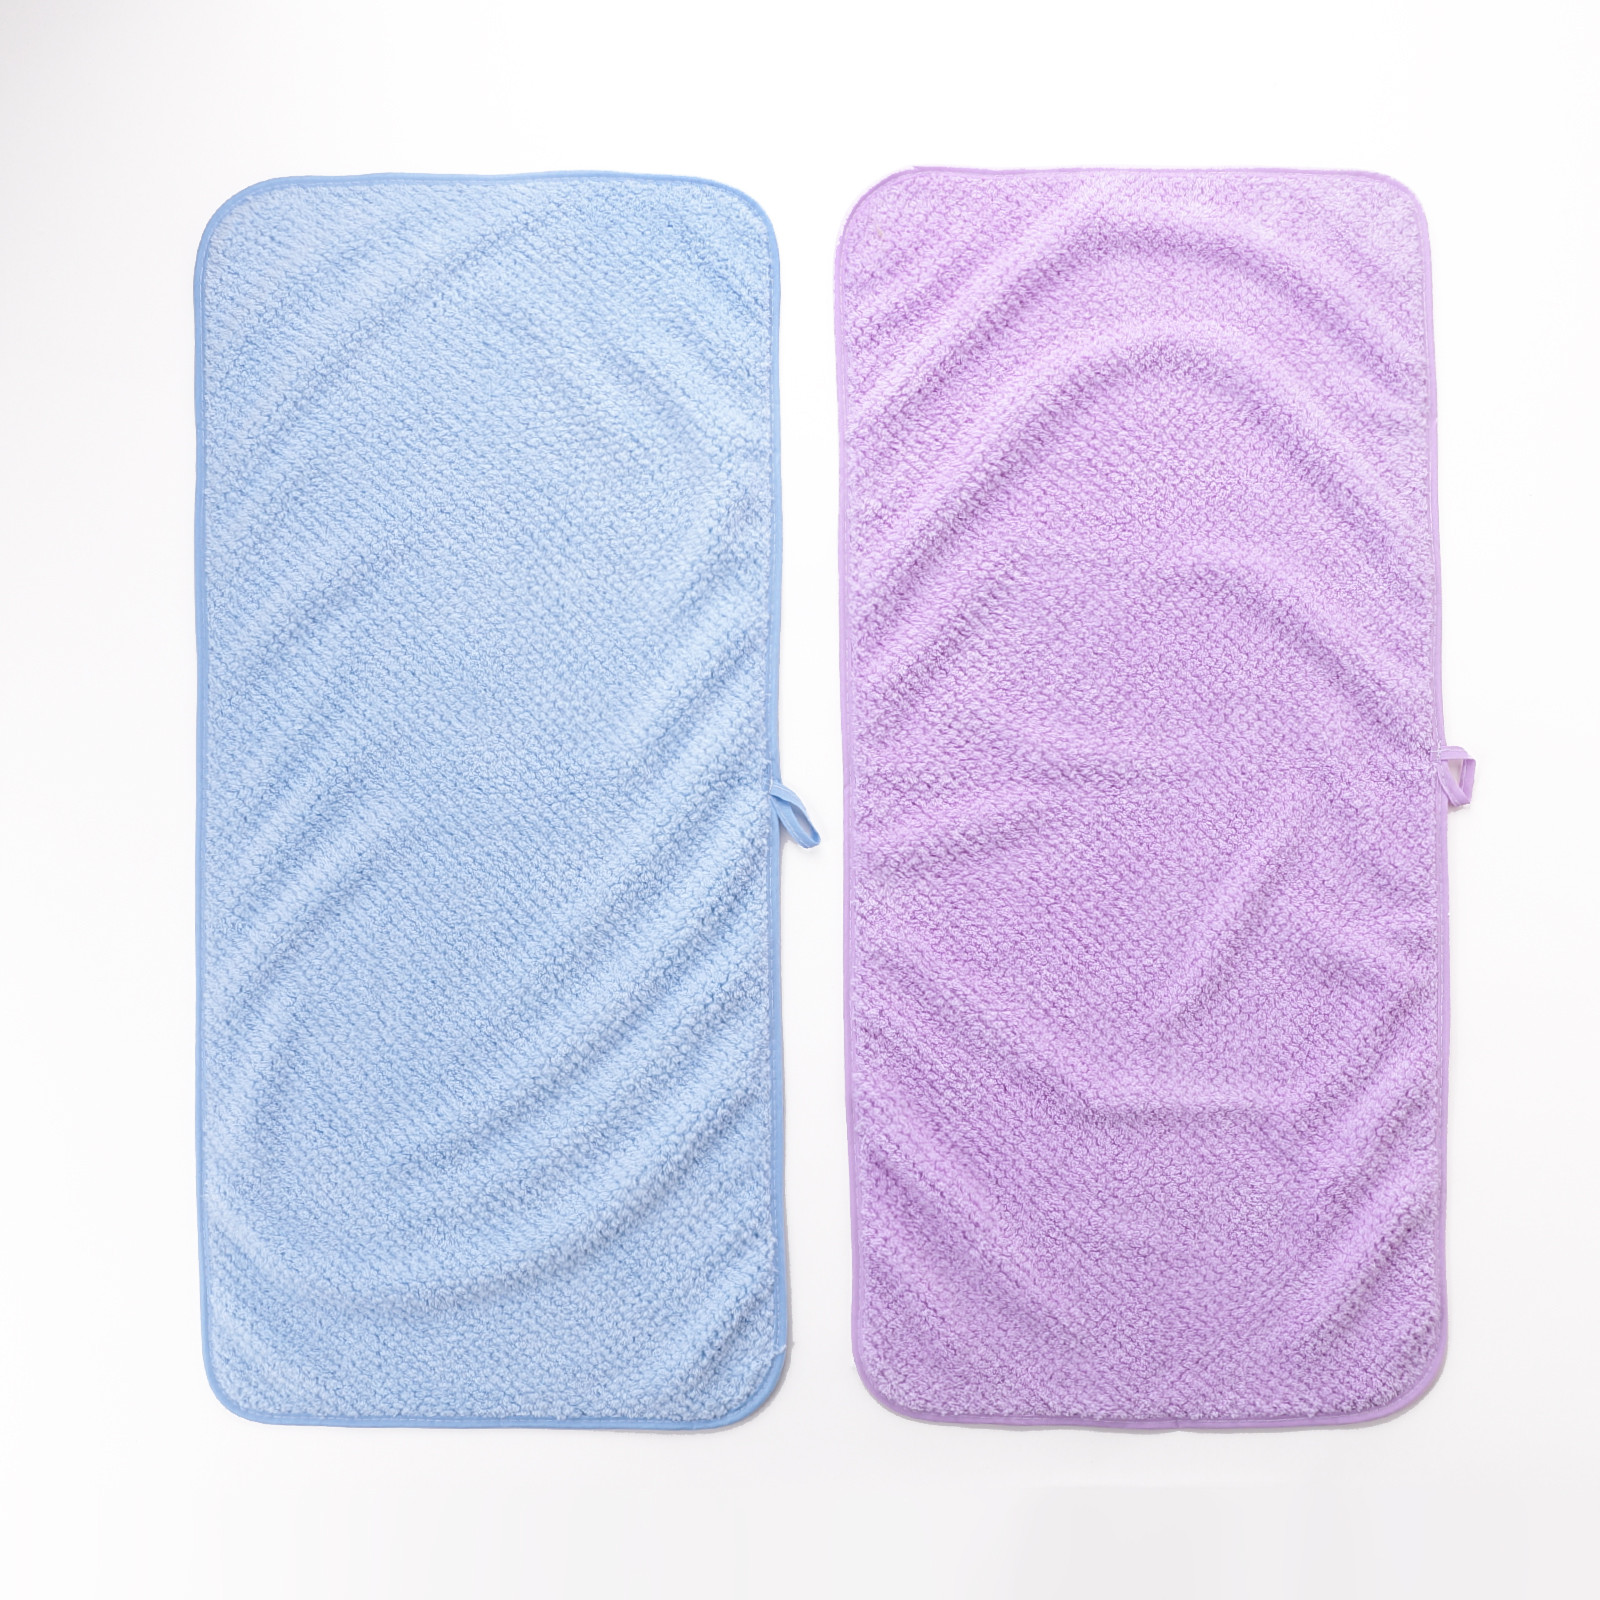 Kuber Industries 2 Piece Hand Towel Set|280 GSM|Gtm & Workout Towels|Super Absorbent & Antibacterial Treatment|Small Size, Travel Friendly  (Blue & Purple)